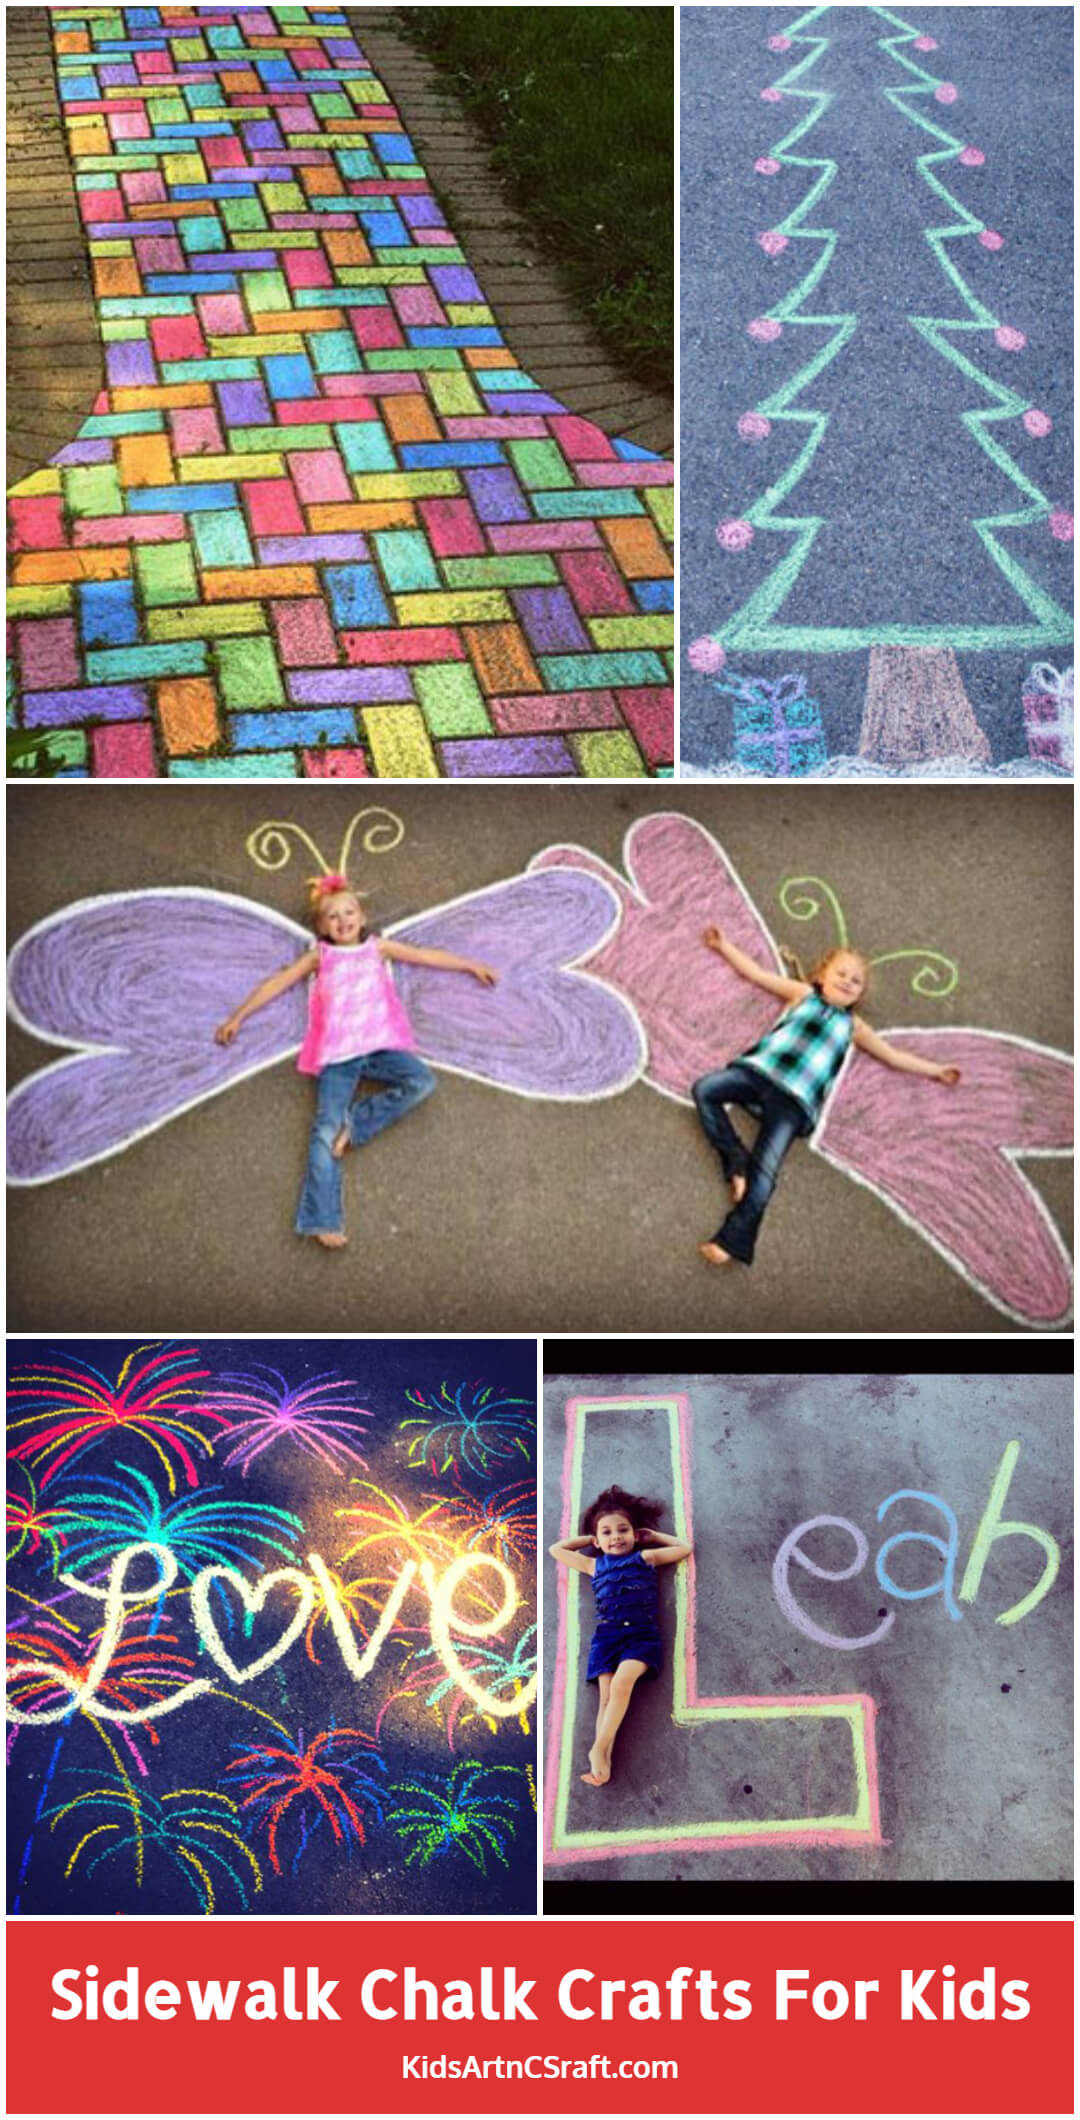 20+ Sidewalk Chalk Activities That’ll Keep Kids Entertained for Hours